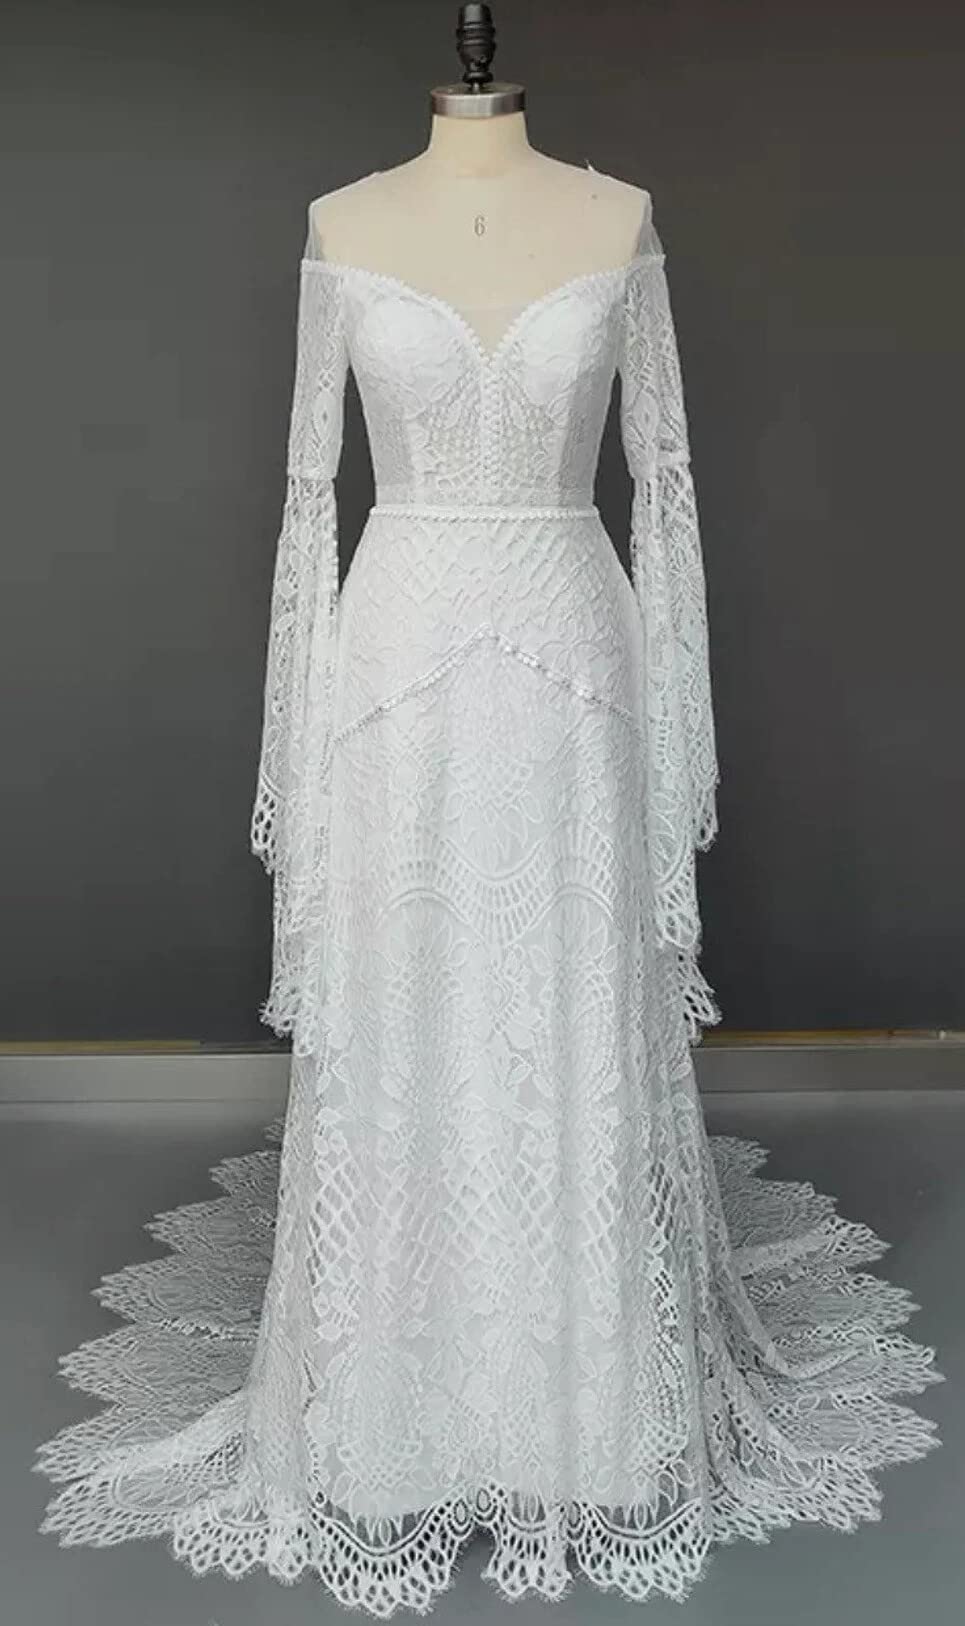 Long Belled Sleeve Woven Lace Wedding Dress in Ivory